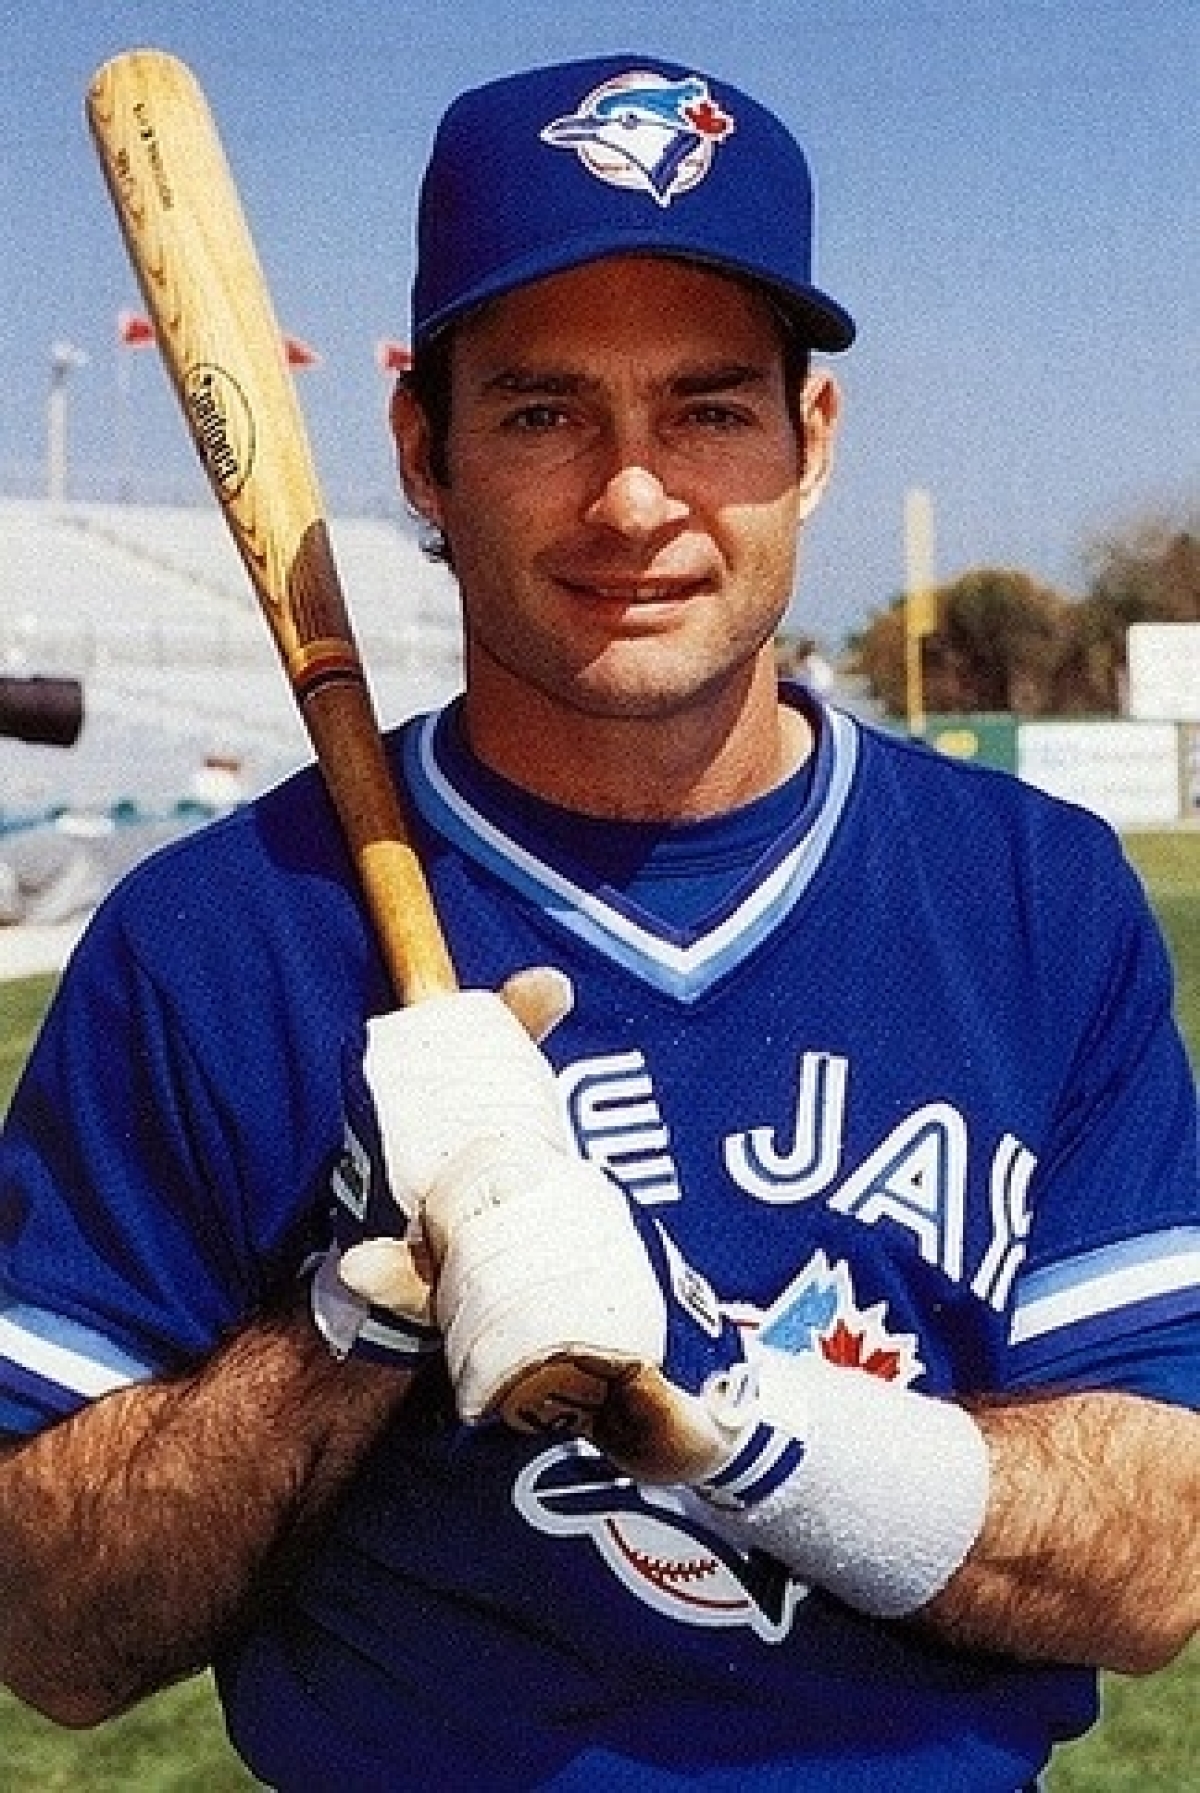 Not in Hall of Fame - 32. Paul Molitor